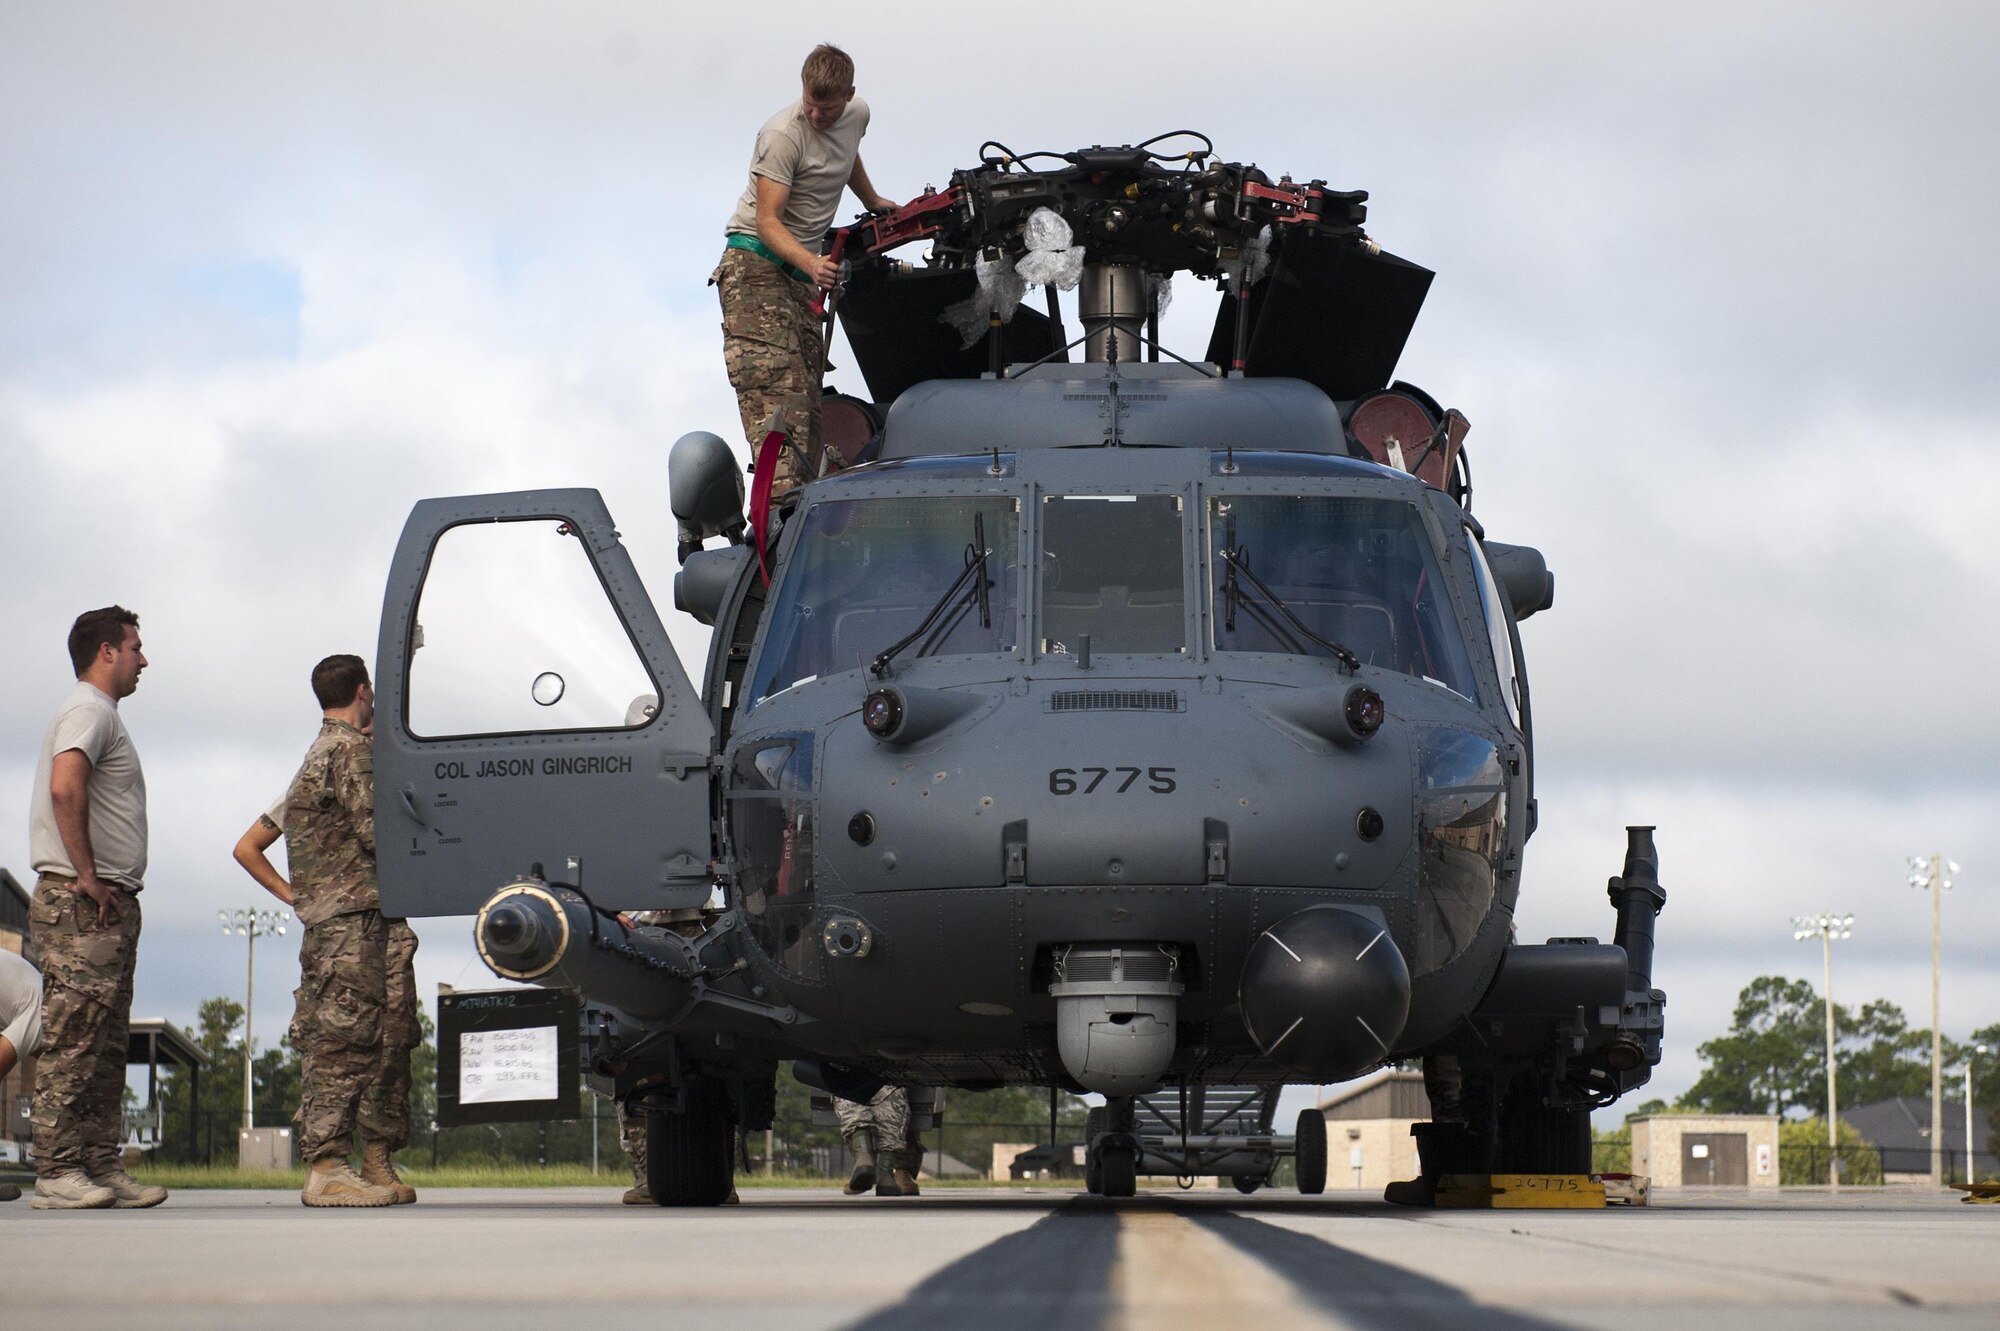 U.S. Air Force Airmen assigned to the 41st Helicopter Maintenance Unit finish folding the blades attached to an HH-60G Pave hawk during rapid rescue preparation before the helicopter deployed, Sept. 13, 2016, at Moody Air Force Base, Ga. This helicopter was deployed to Southeast Europe in support of recue missions. (U.S. Air Force photo by Airman 1st Class Daniel Snider)